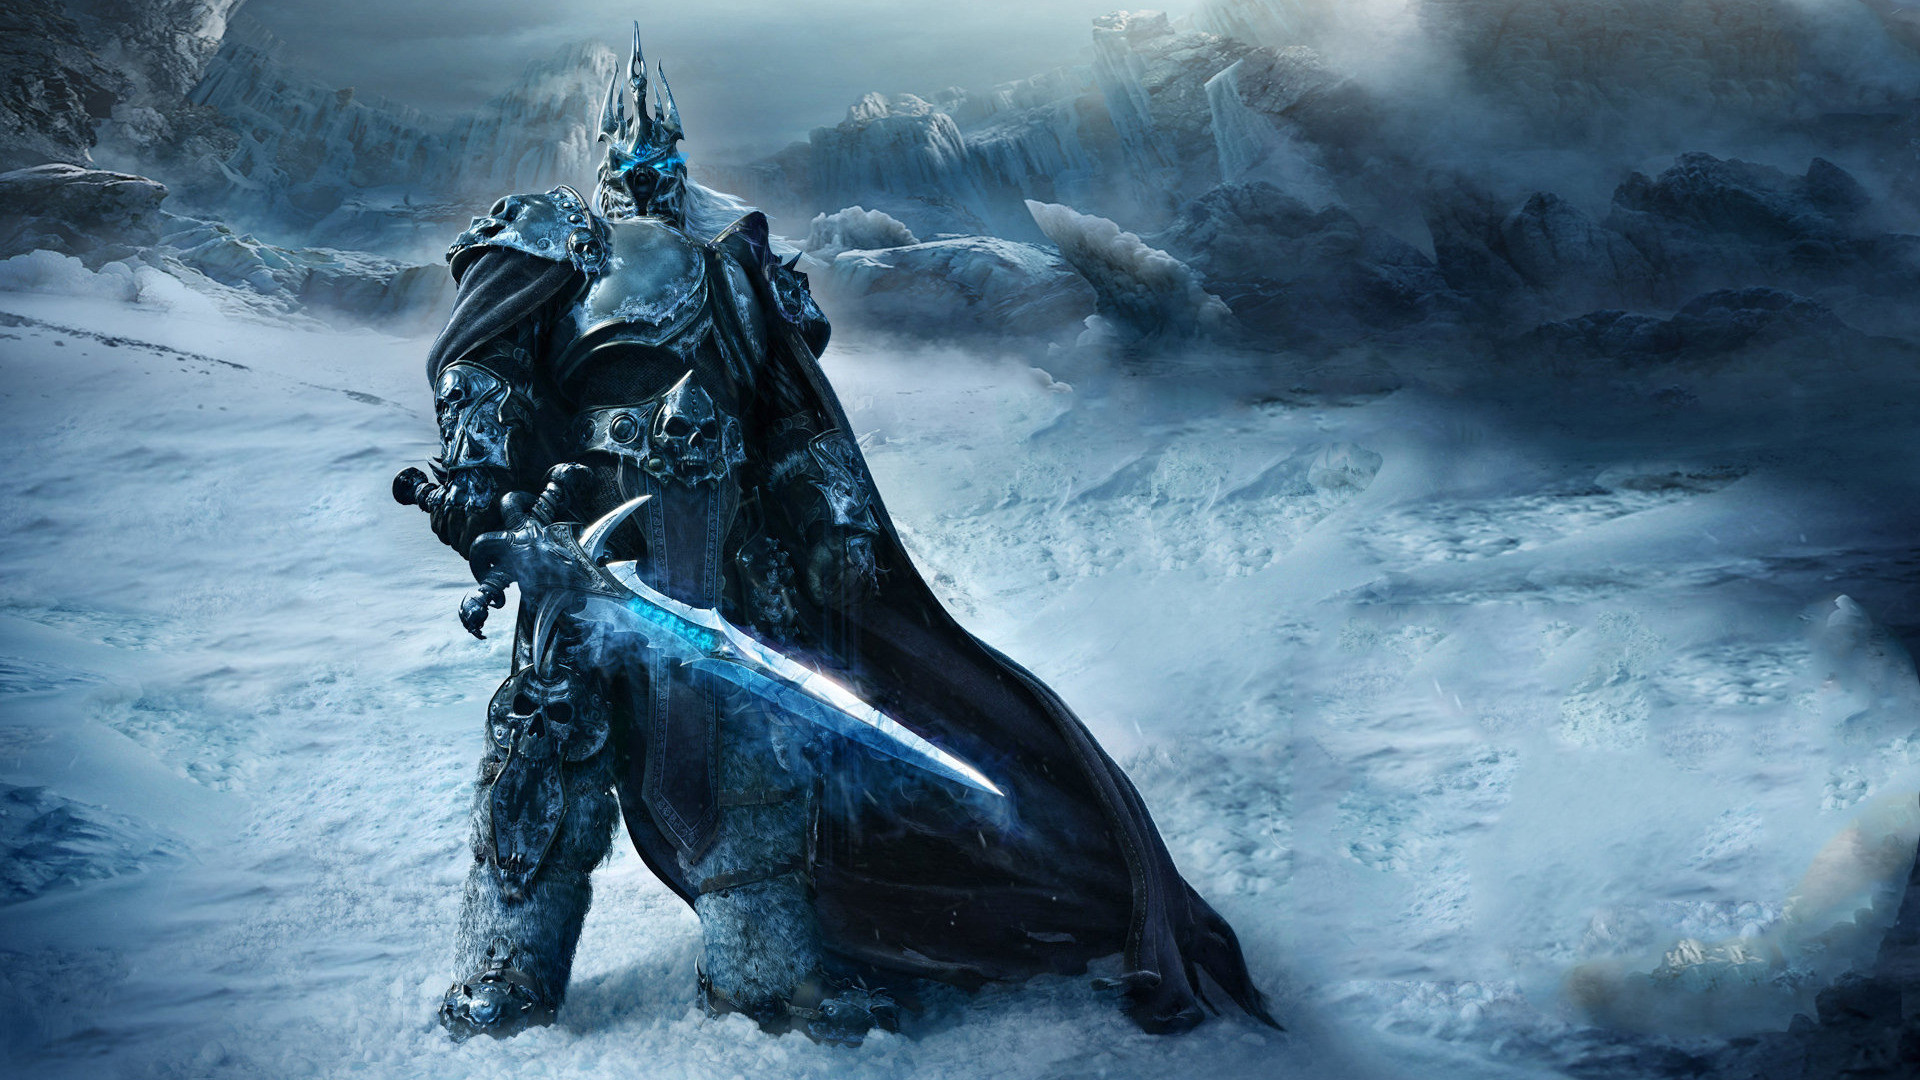 1920x1080 World of Warcraft Wrath of the Lich King